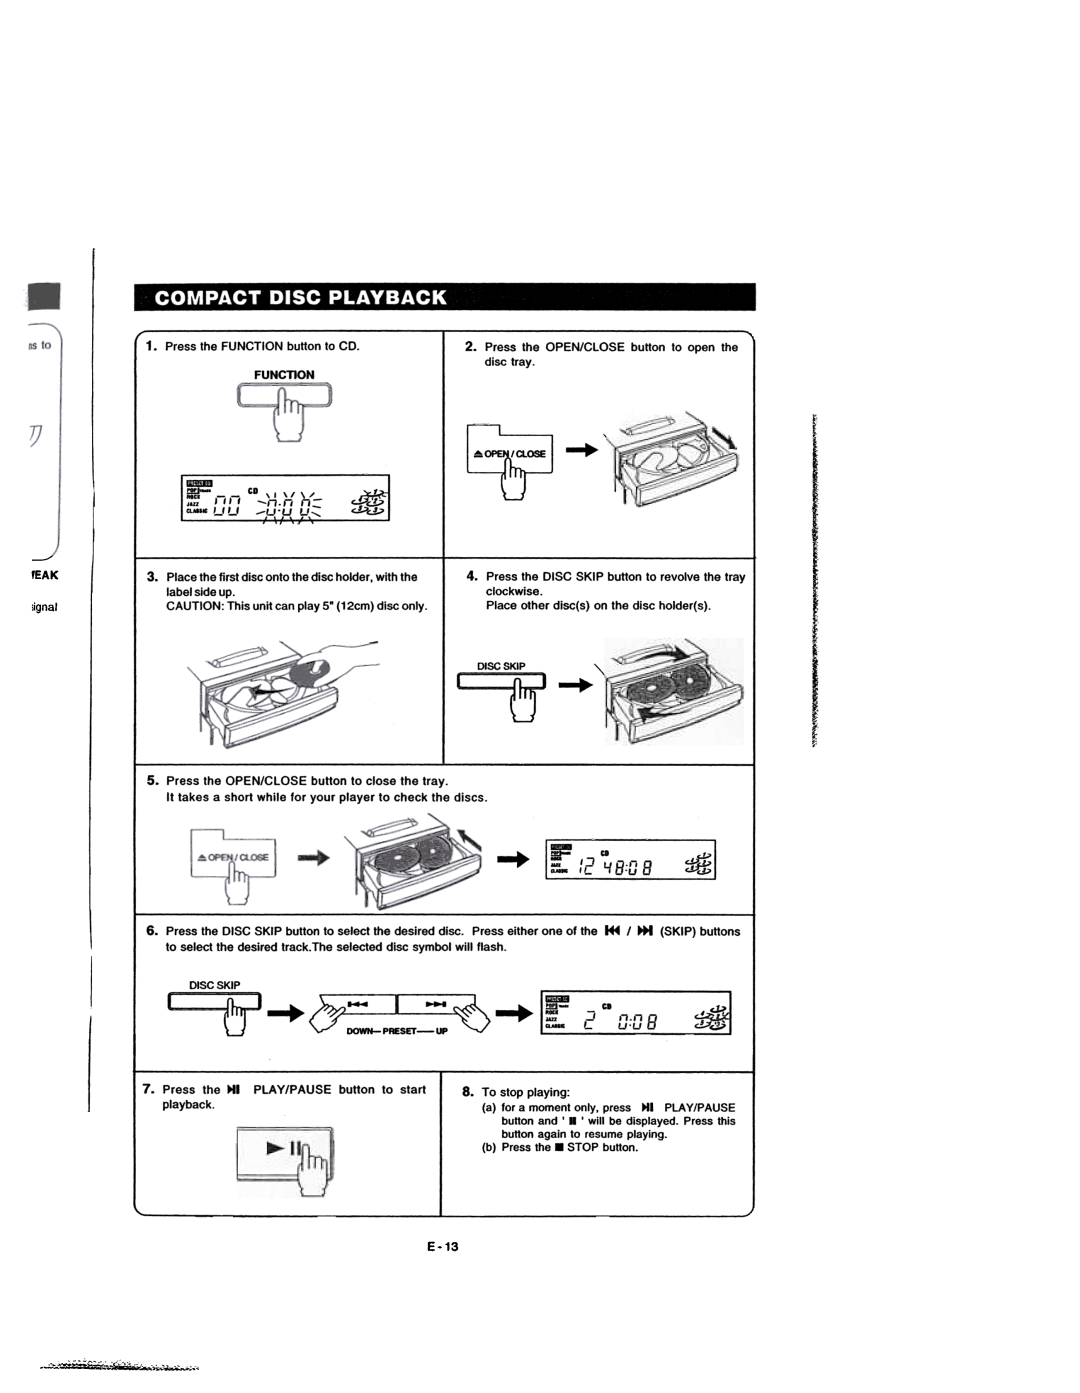 Dolby Laboratories CD Player manual ~~~~ 